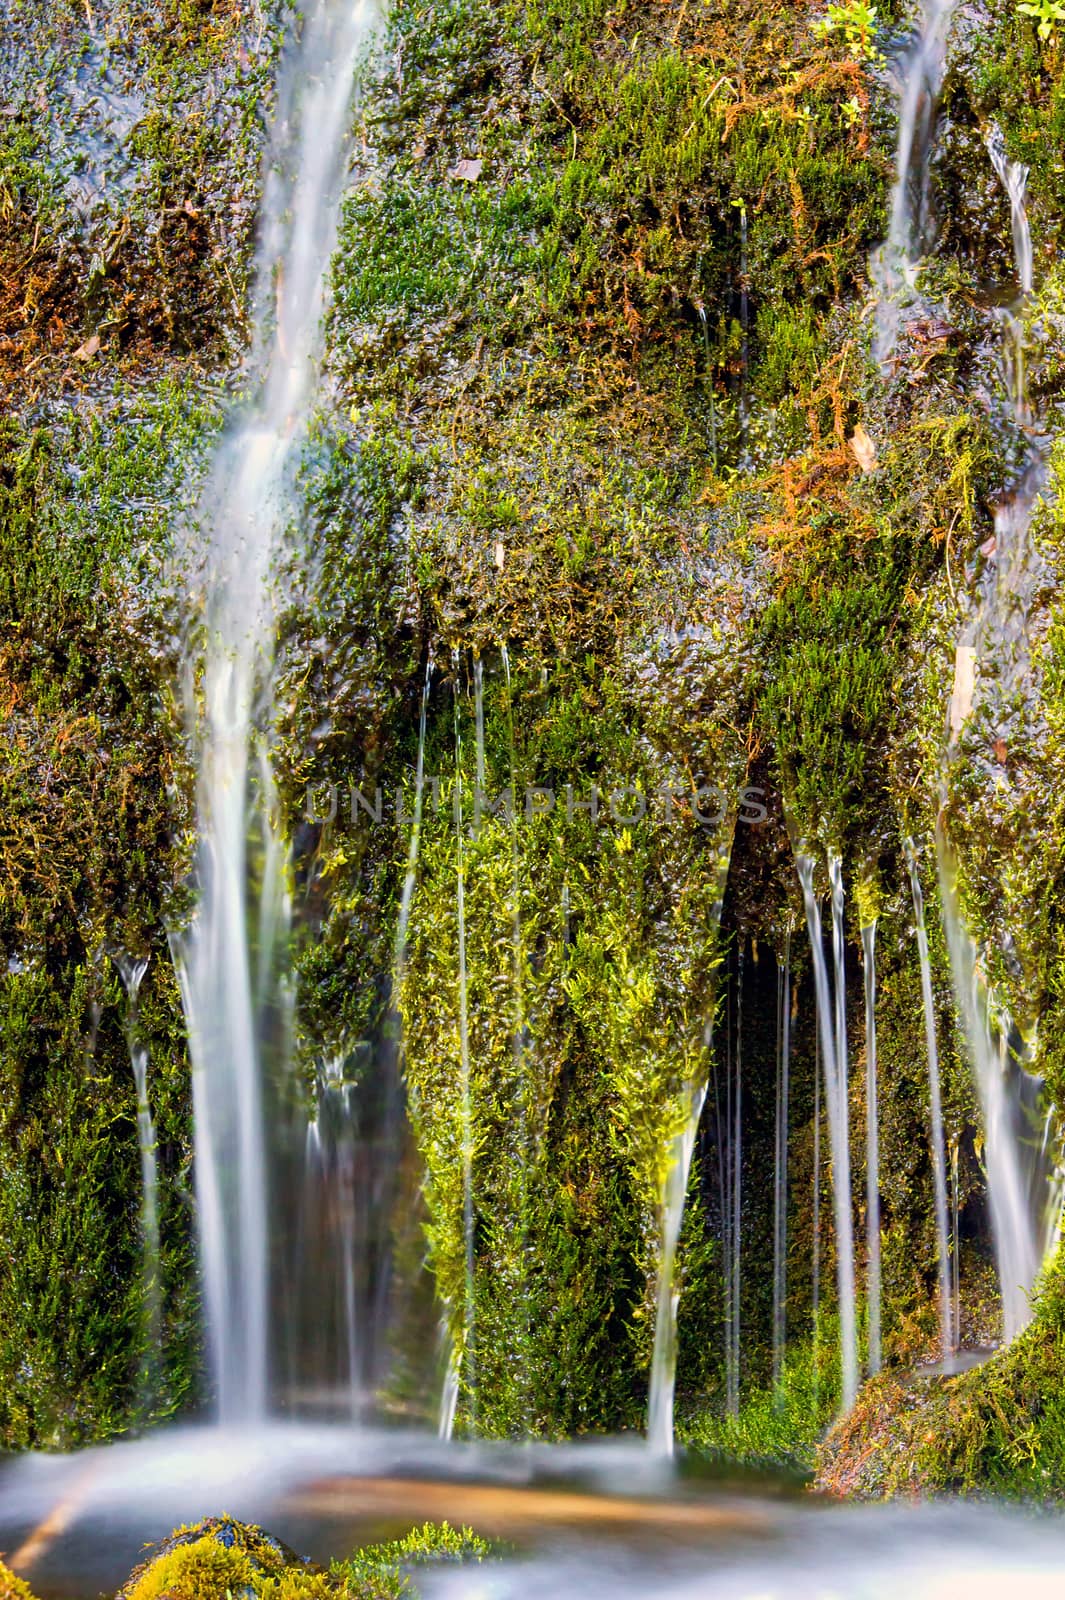 Detail of a small waterfall in the Gjain valley in Iceland